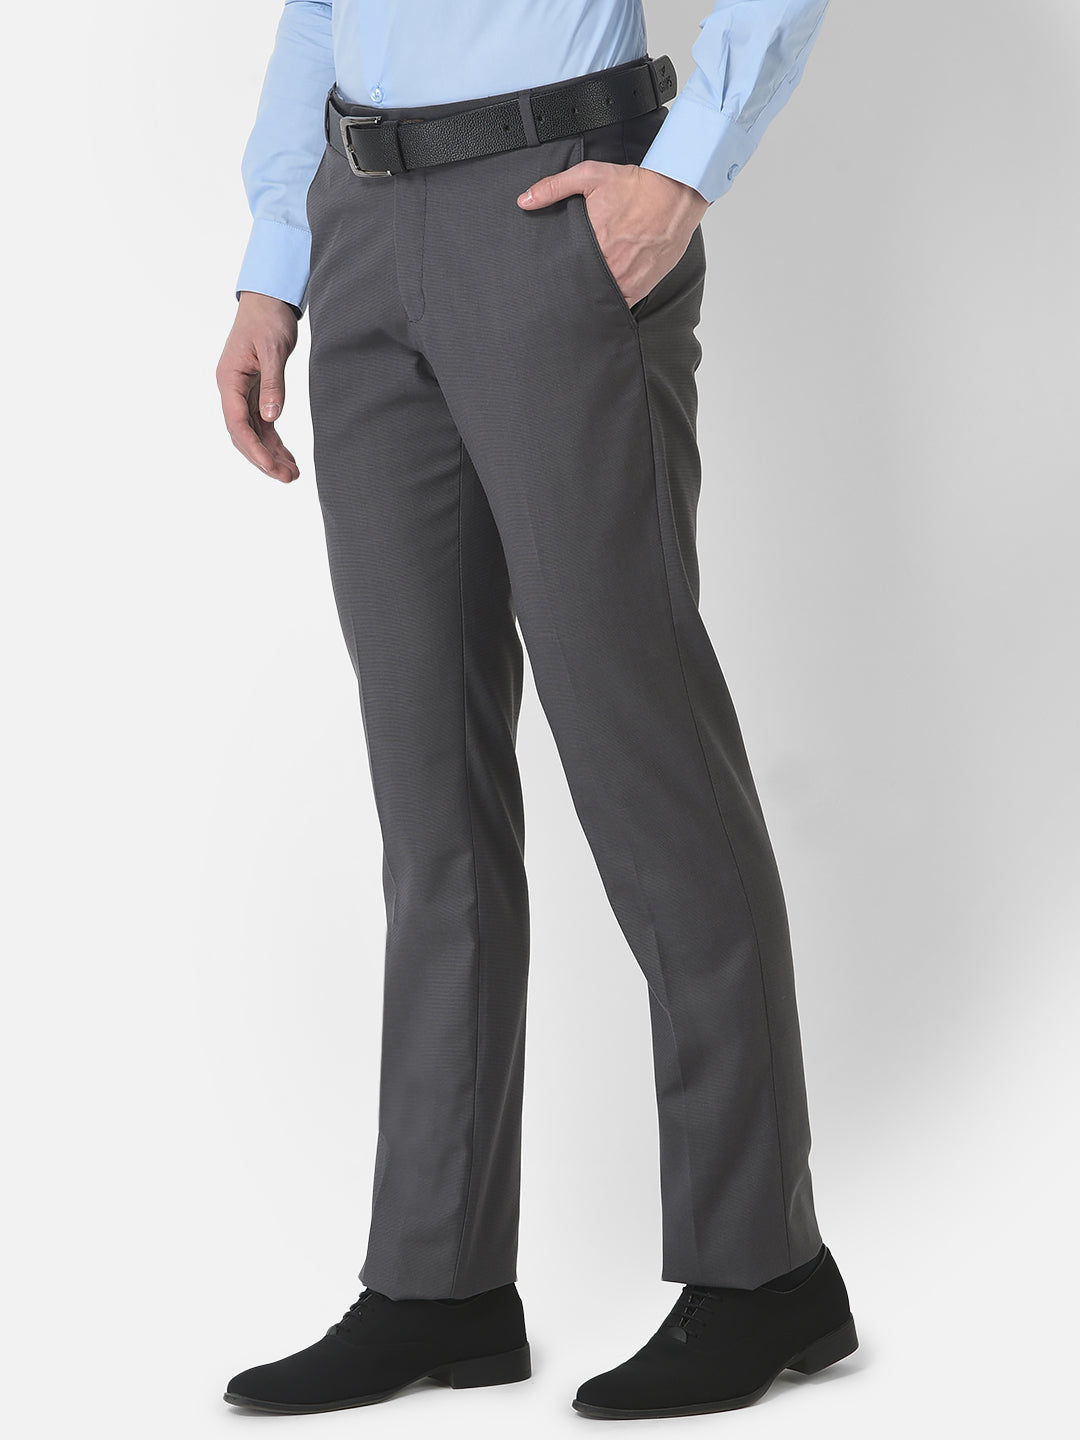 Men Office Outfit Navy Blue With Grey Pant Elegant Shirt Pant SAINLY